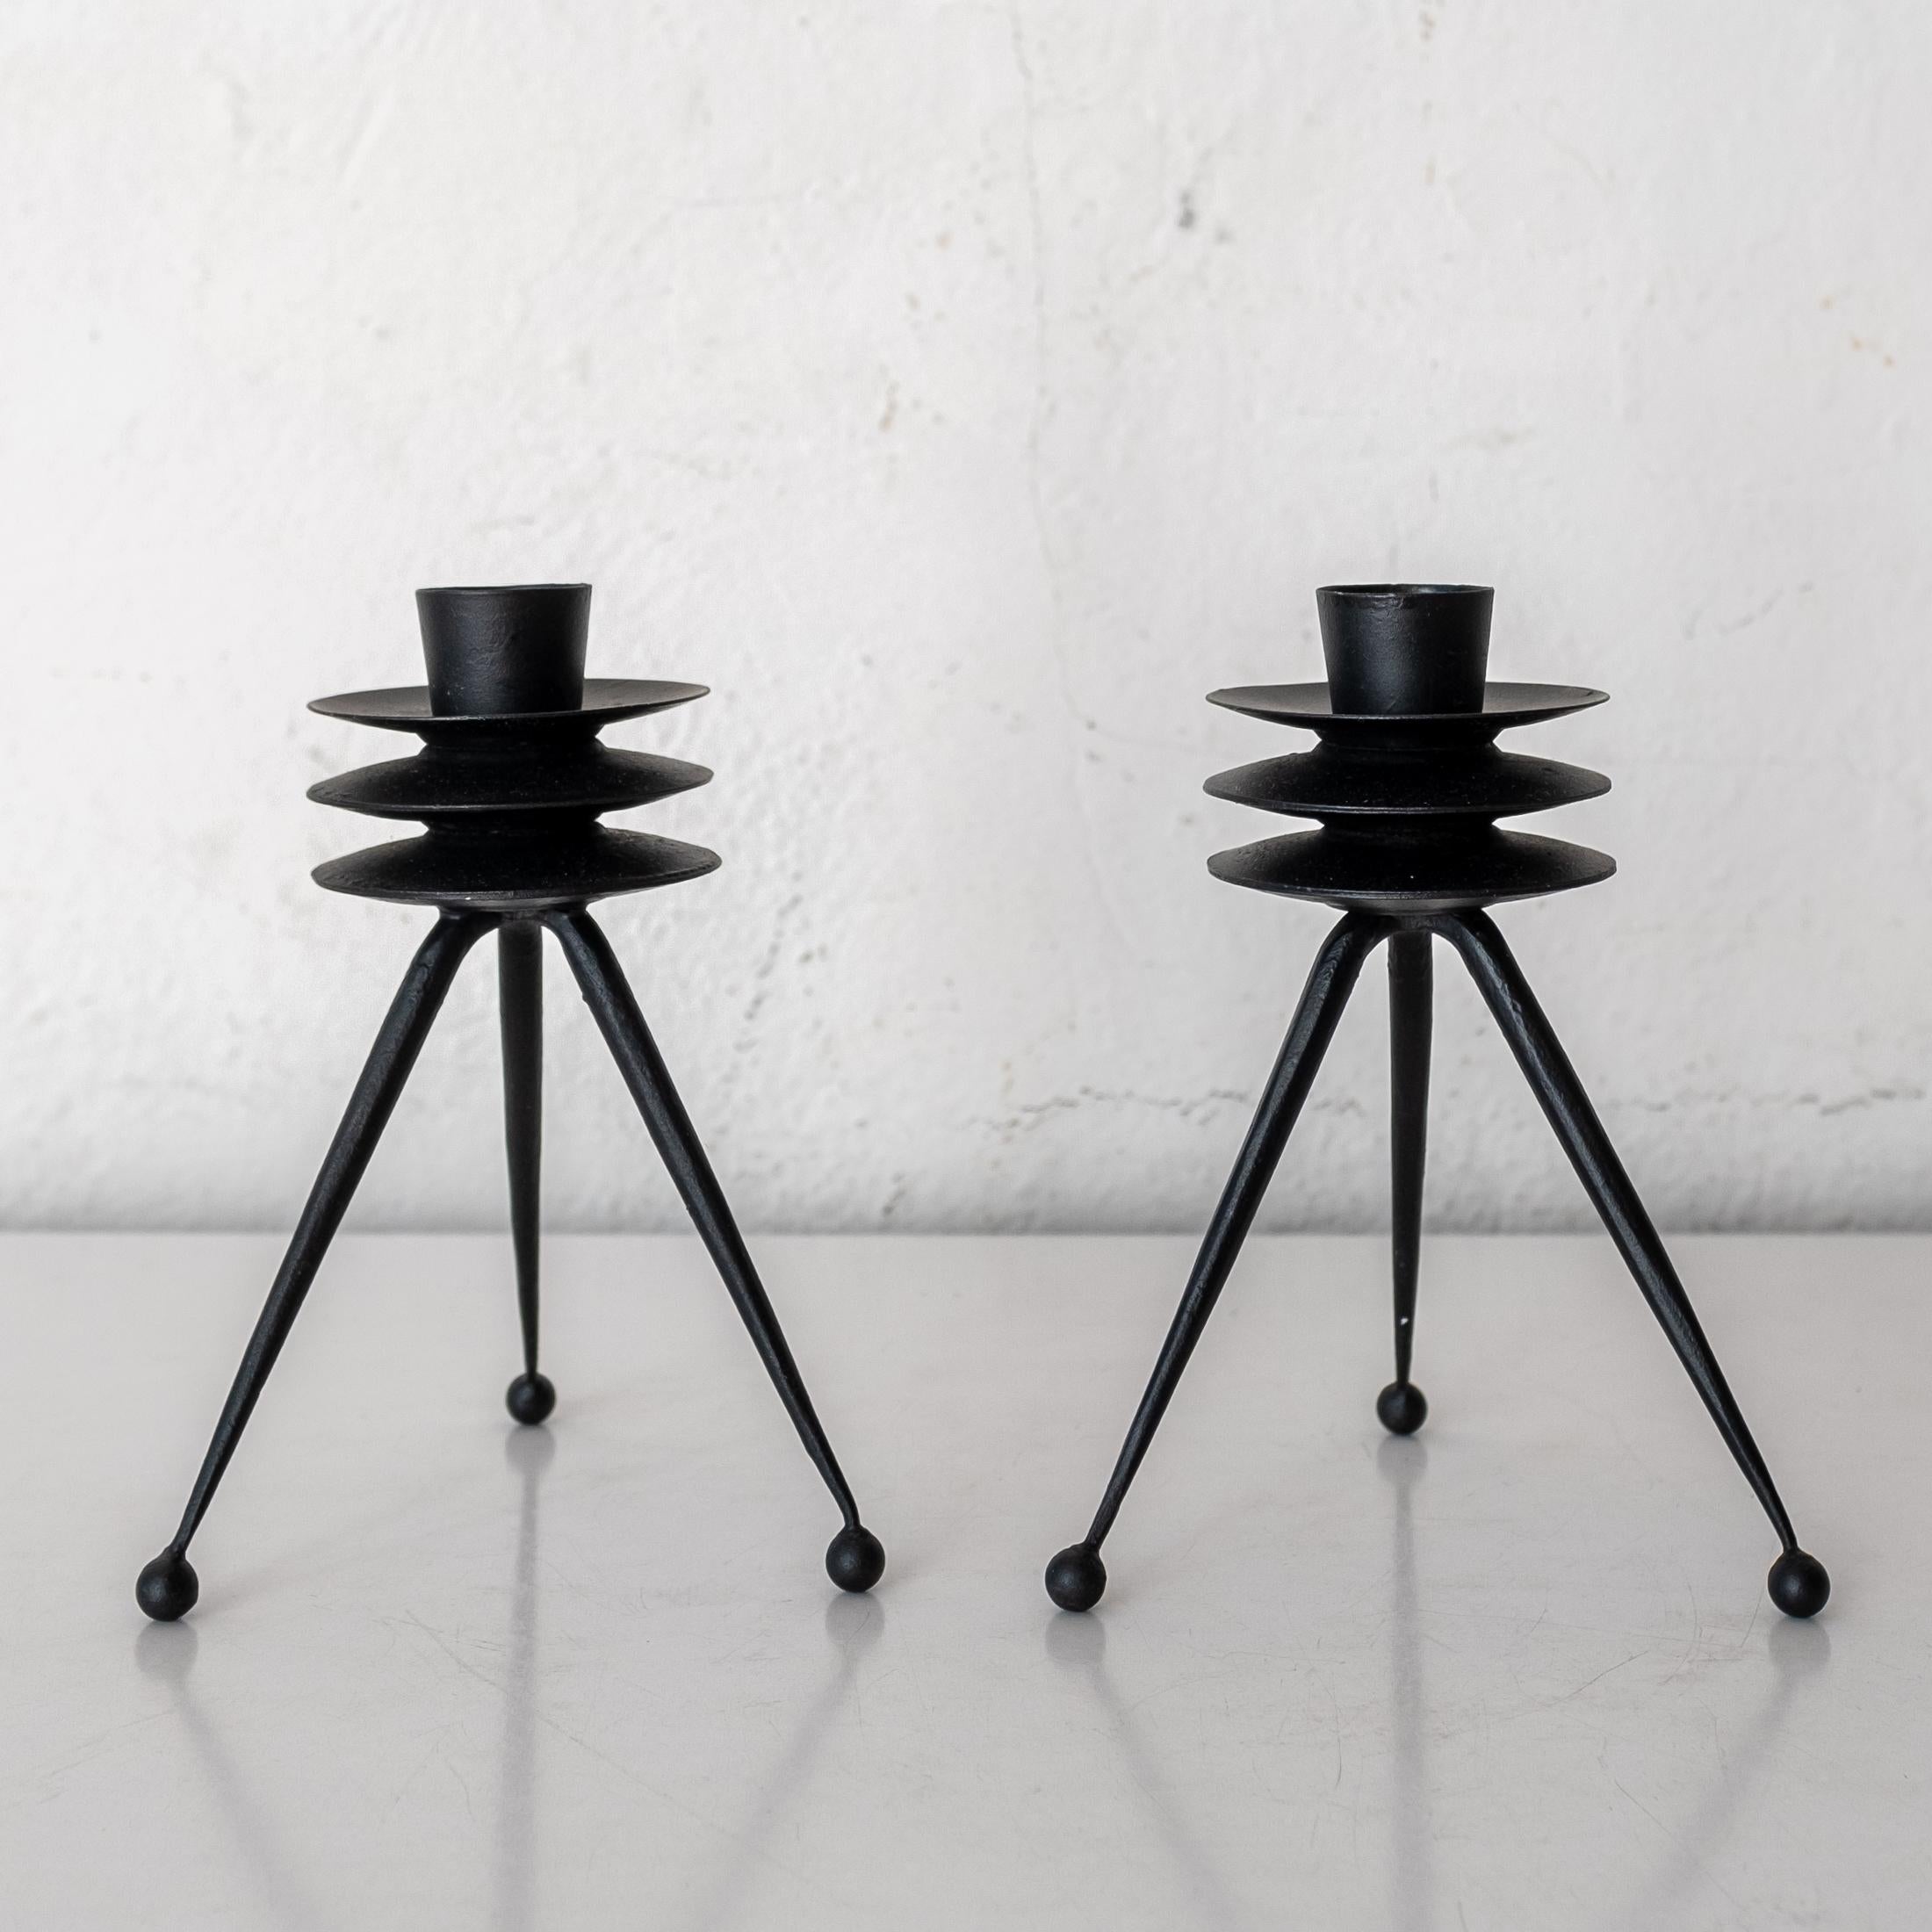 A pair of Tony Paul atomic tripod candle sticks. The cup for the candle holder has a metal spike to ensure the candle stays in palace, This set was part of the Tony Paul Woodlin Hall 